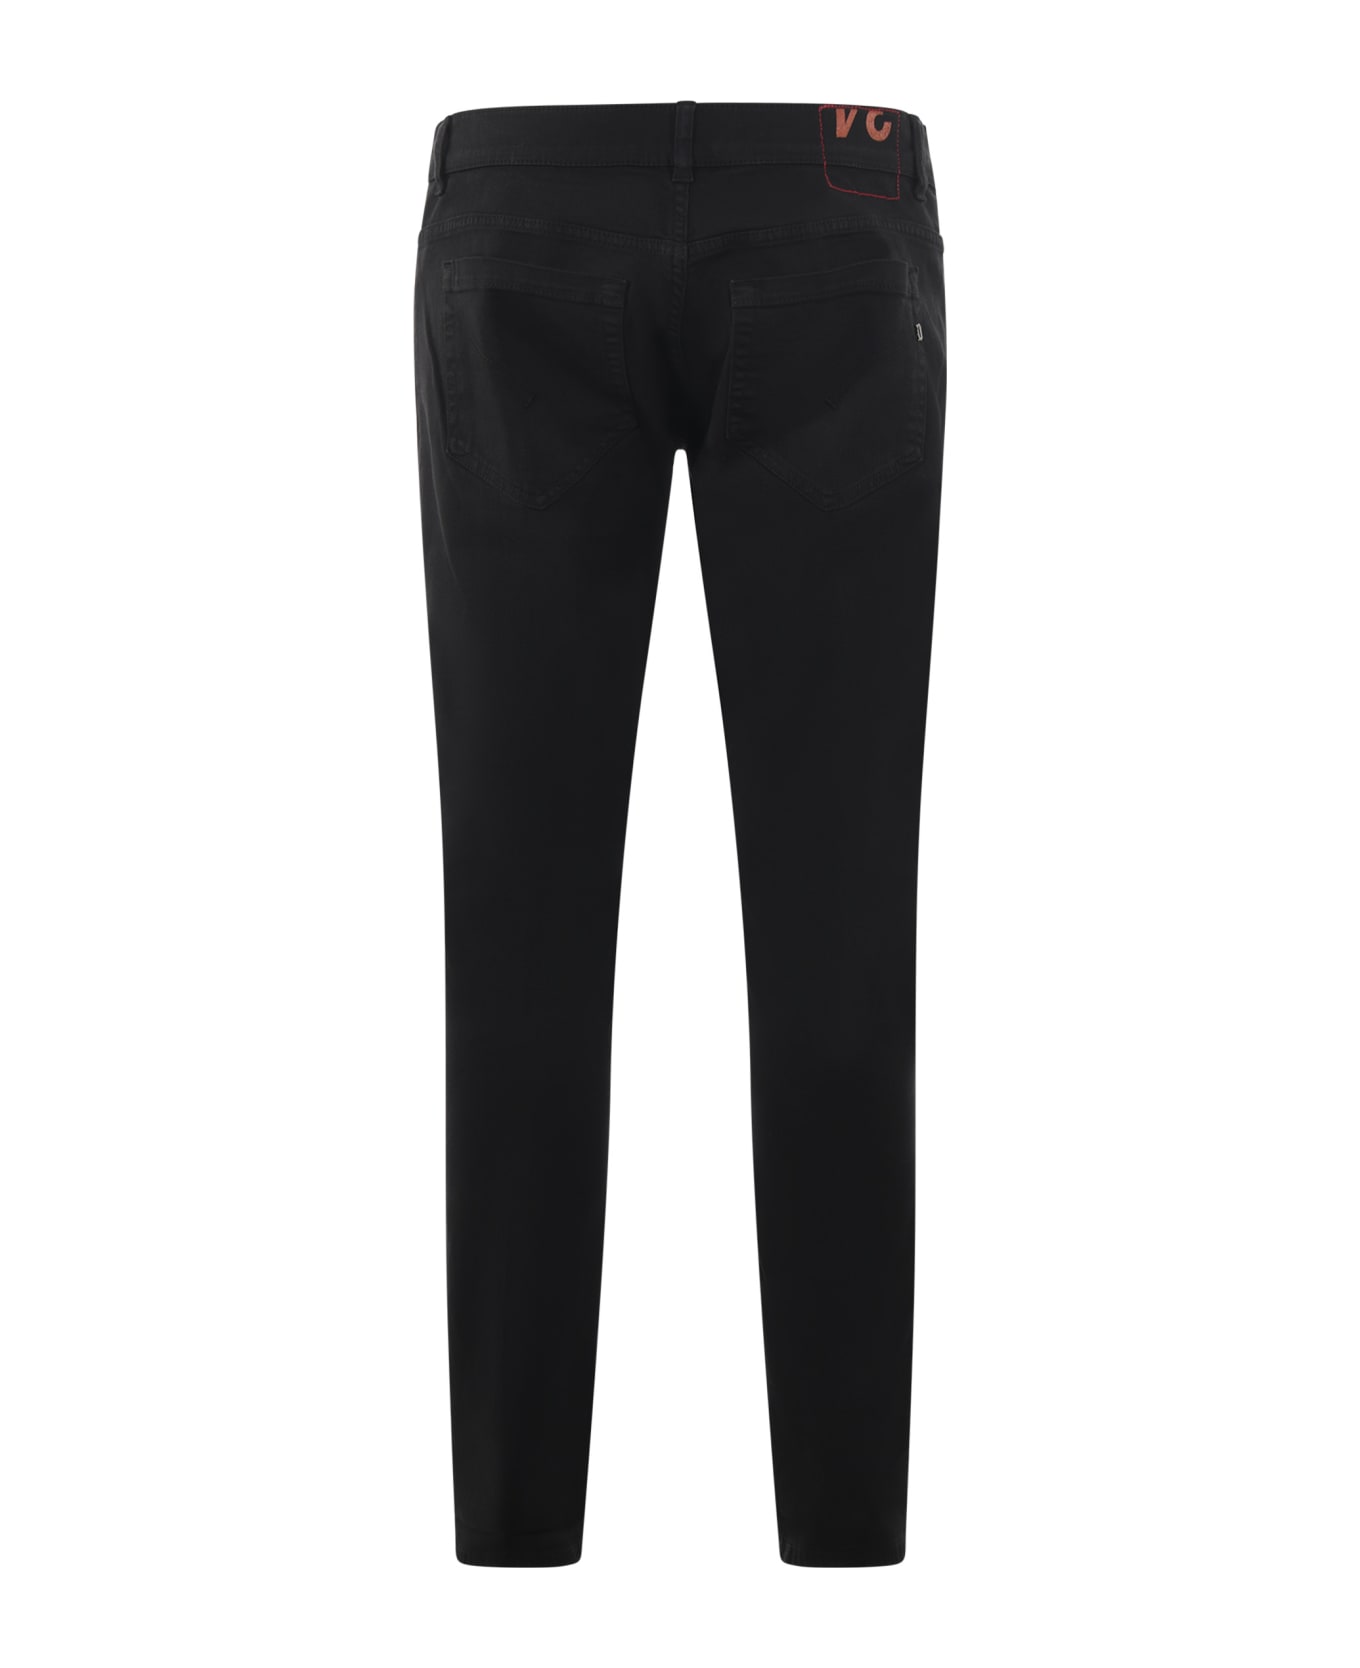 Dondup Concealed Skinny Trousers Dondup - Black ボトムス